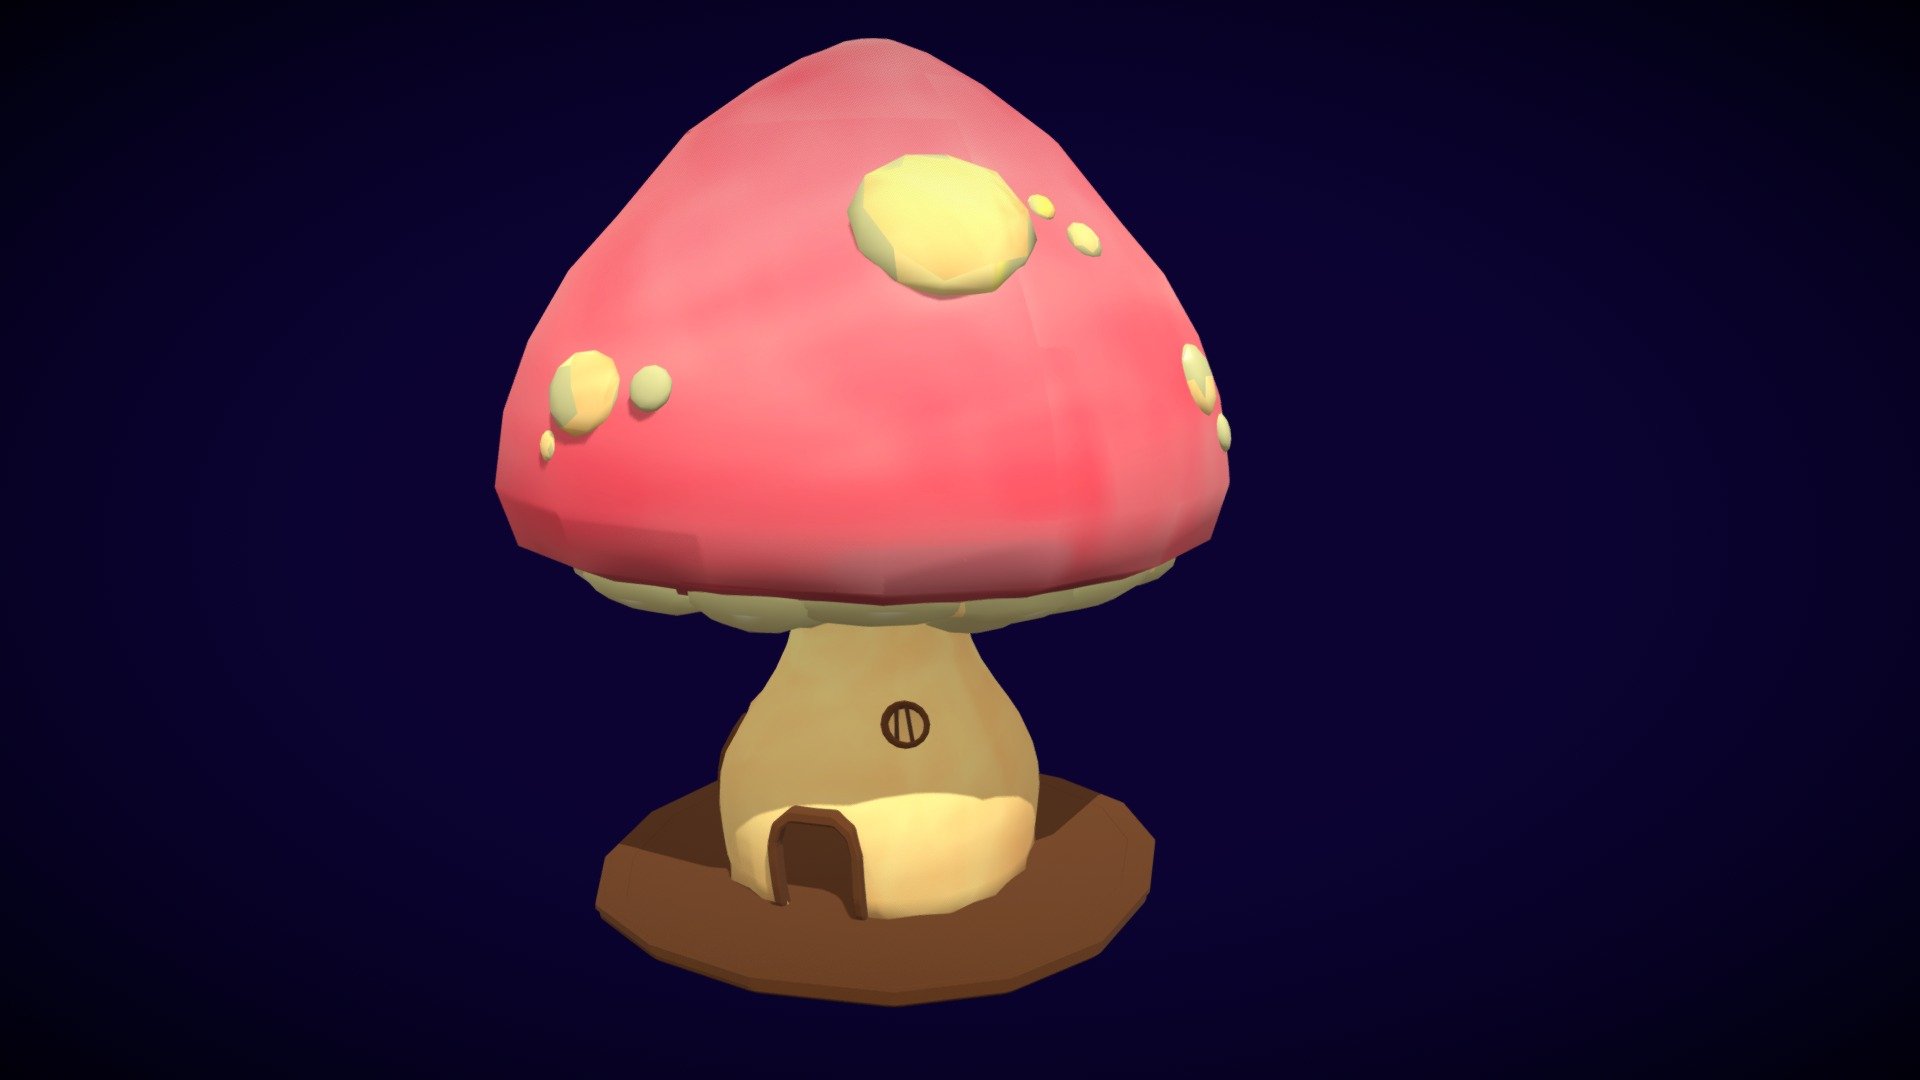 One of my first game assets I modeled and handpainted in Blender about two years ago. Textures are 1024x1024 3d model